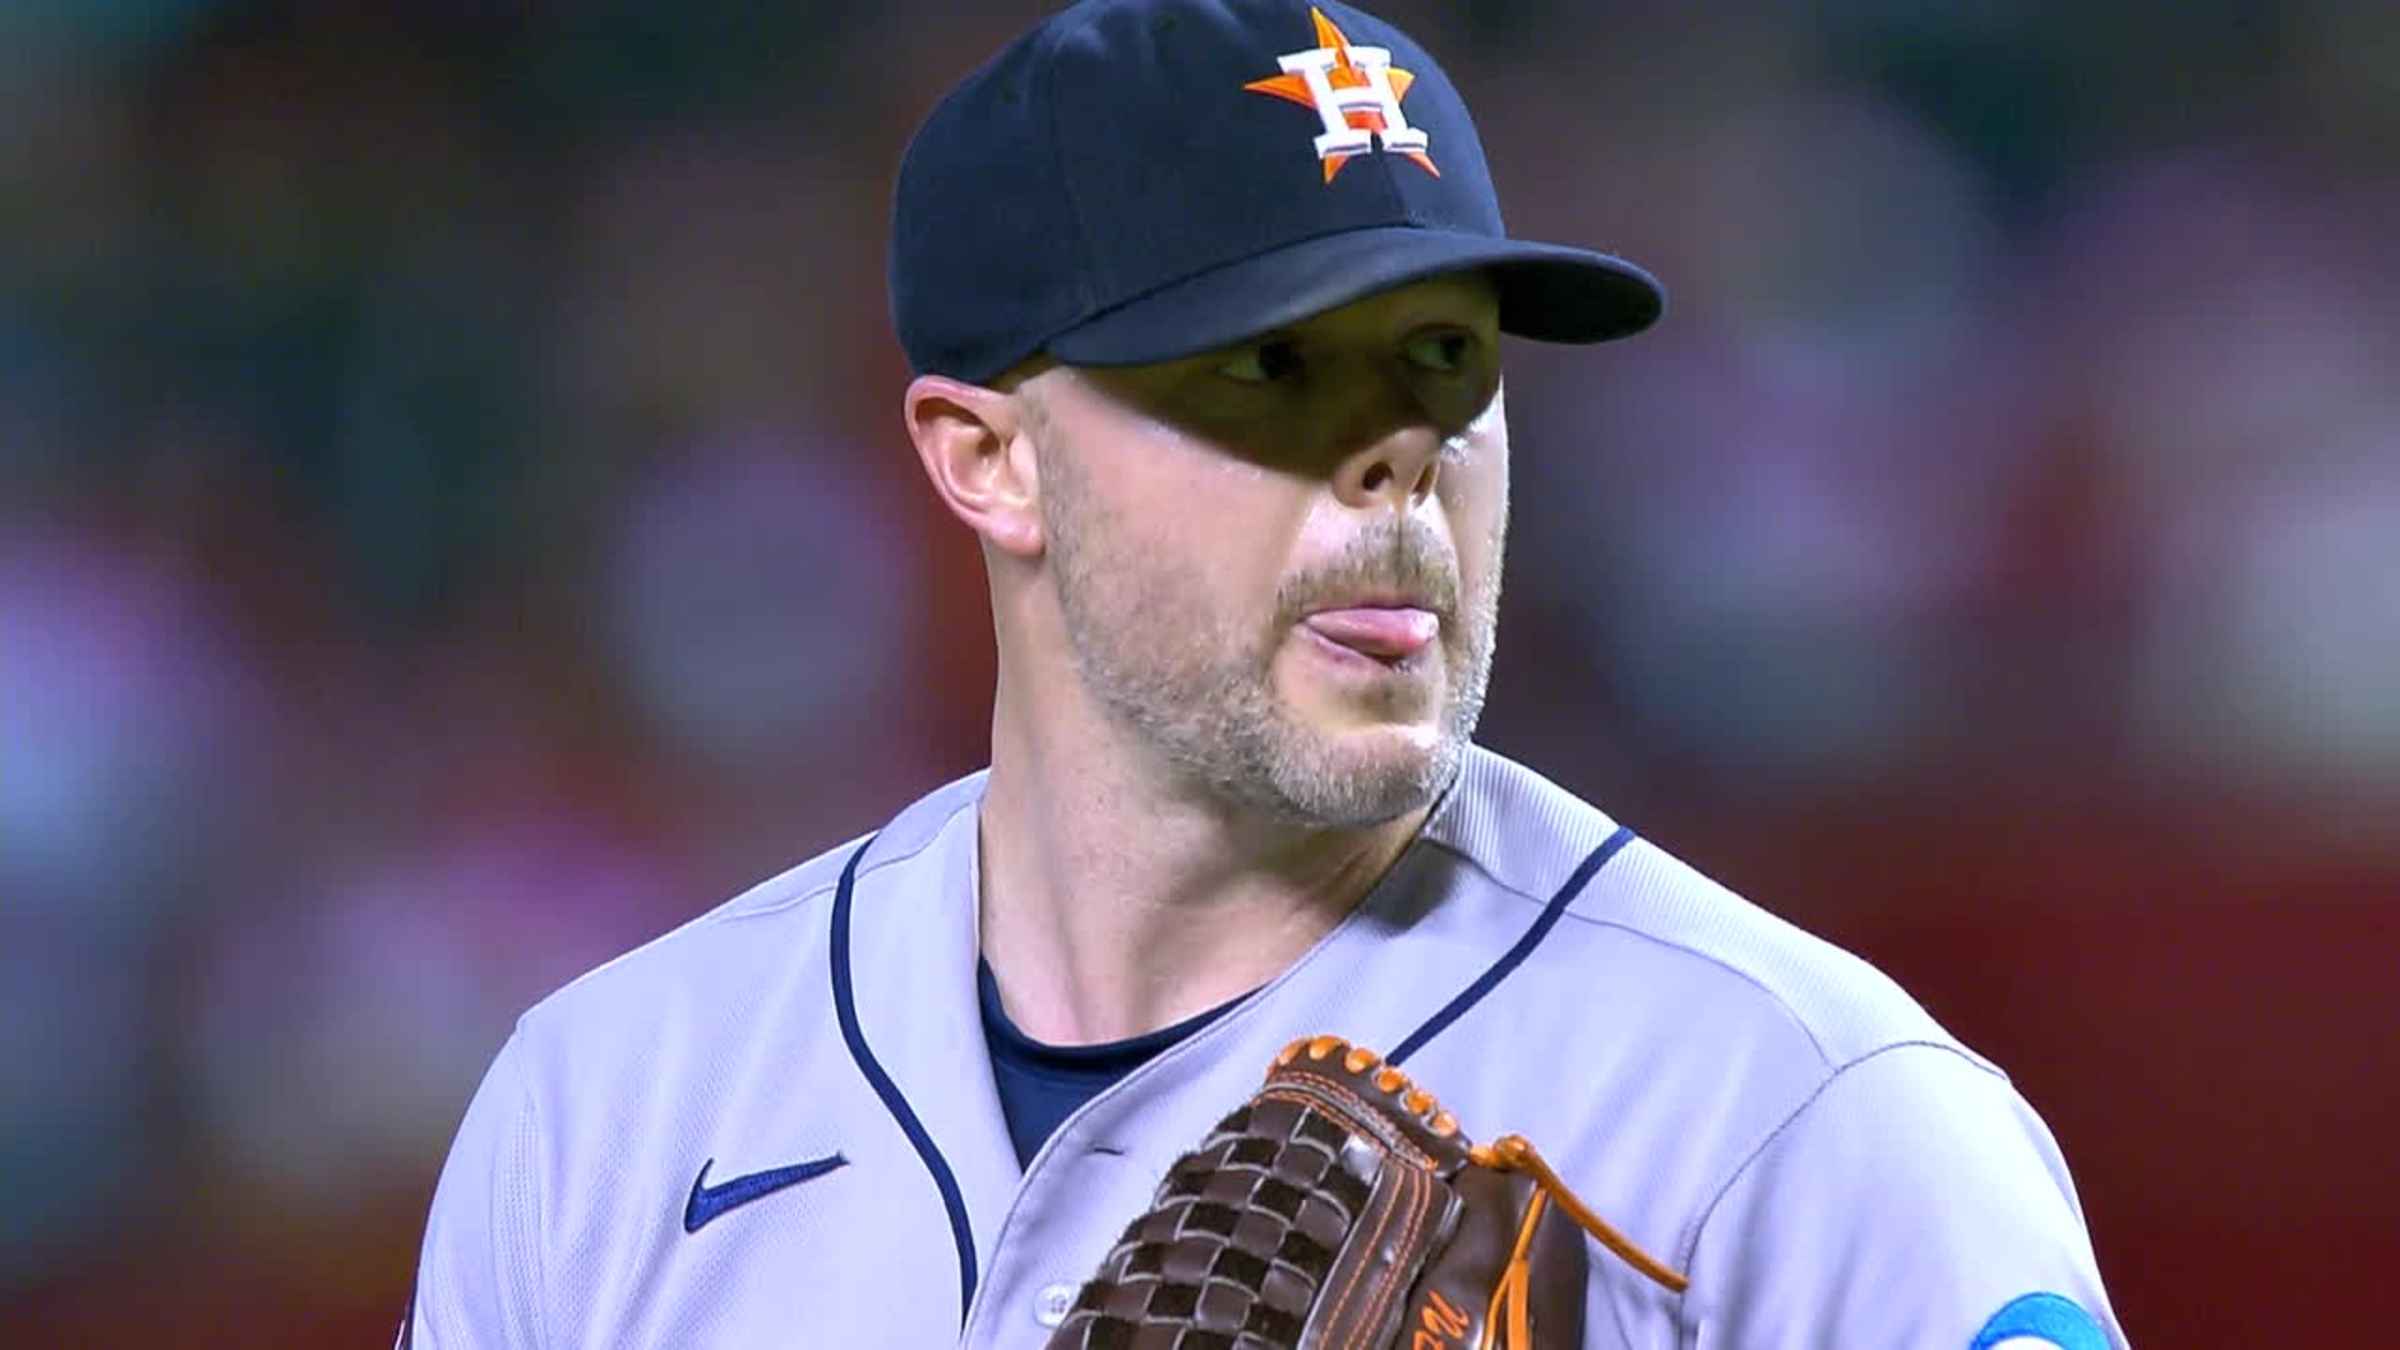 MLB Nightly 9: Astros win in walkoff fashion; Reds' Leake dominant on the  mound, goes deep